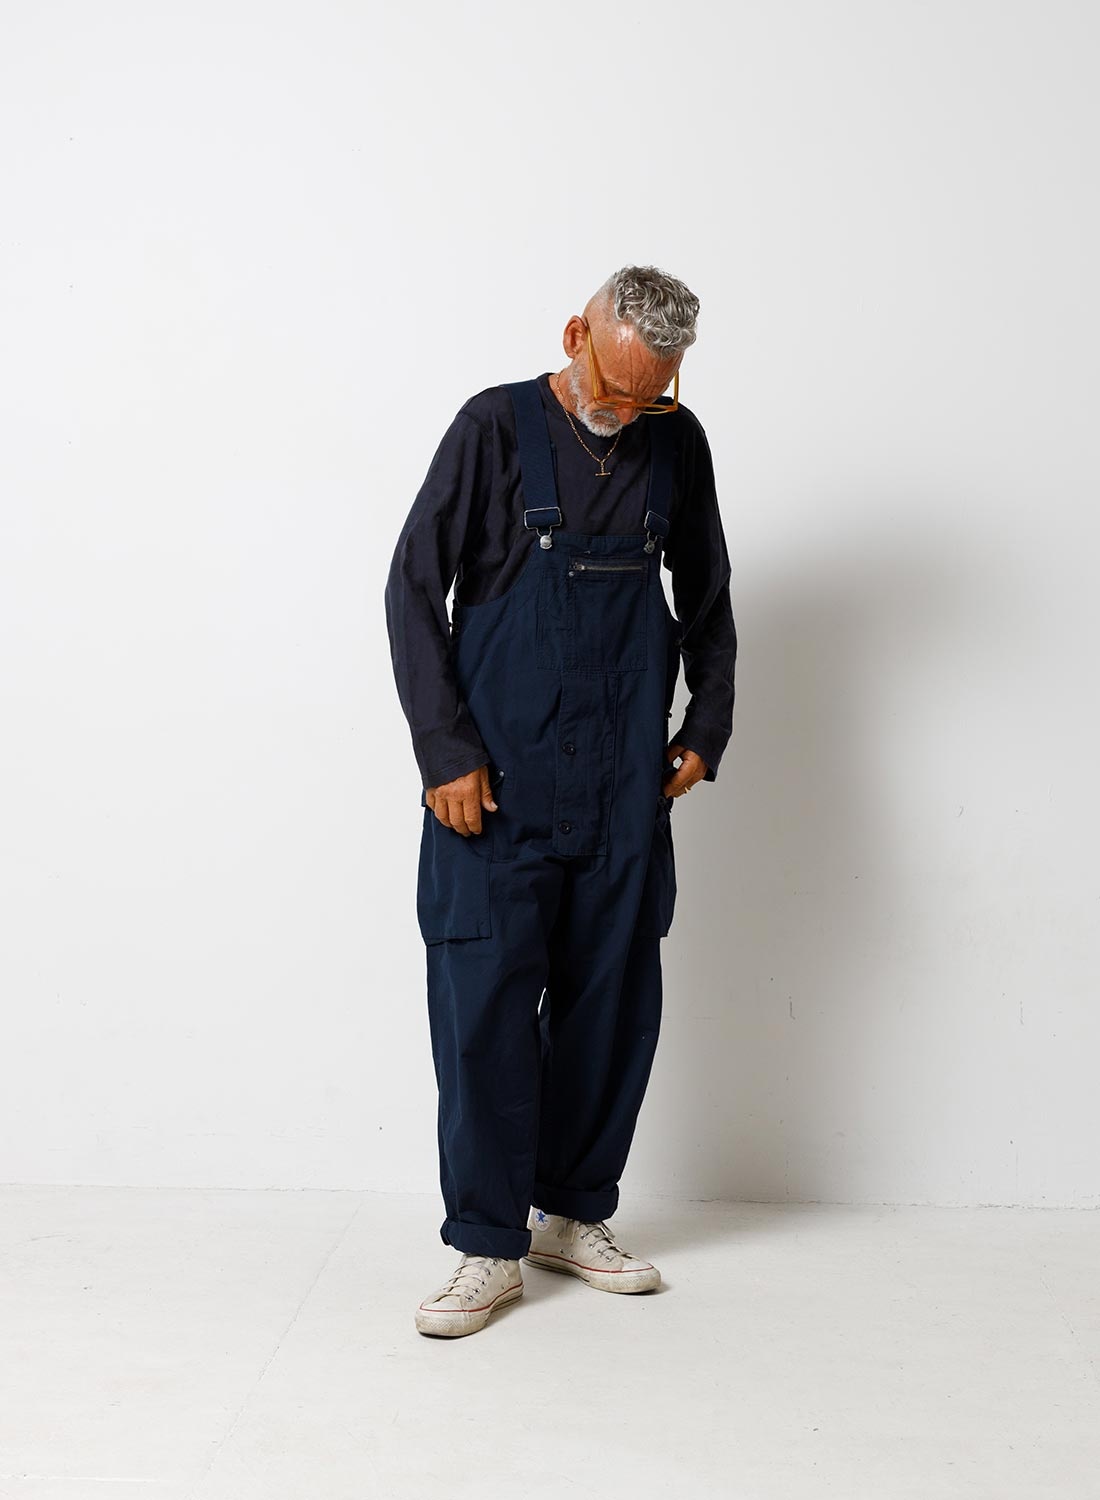 Naval Dungaree in Black Navy (Cotton Ripstop) - 3